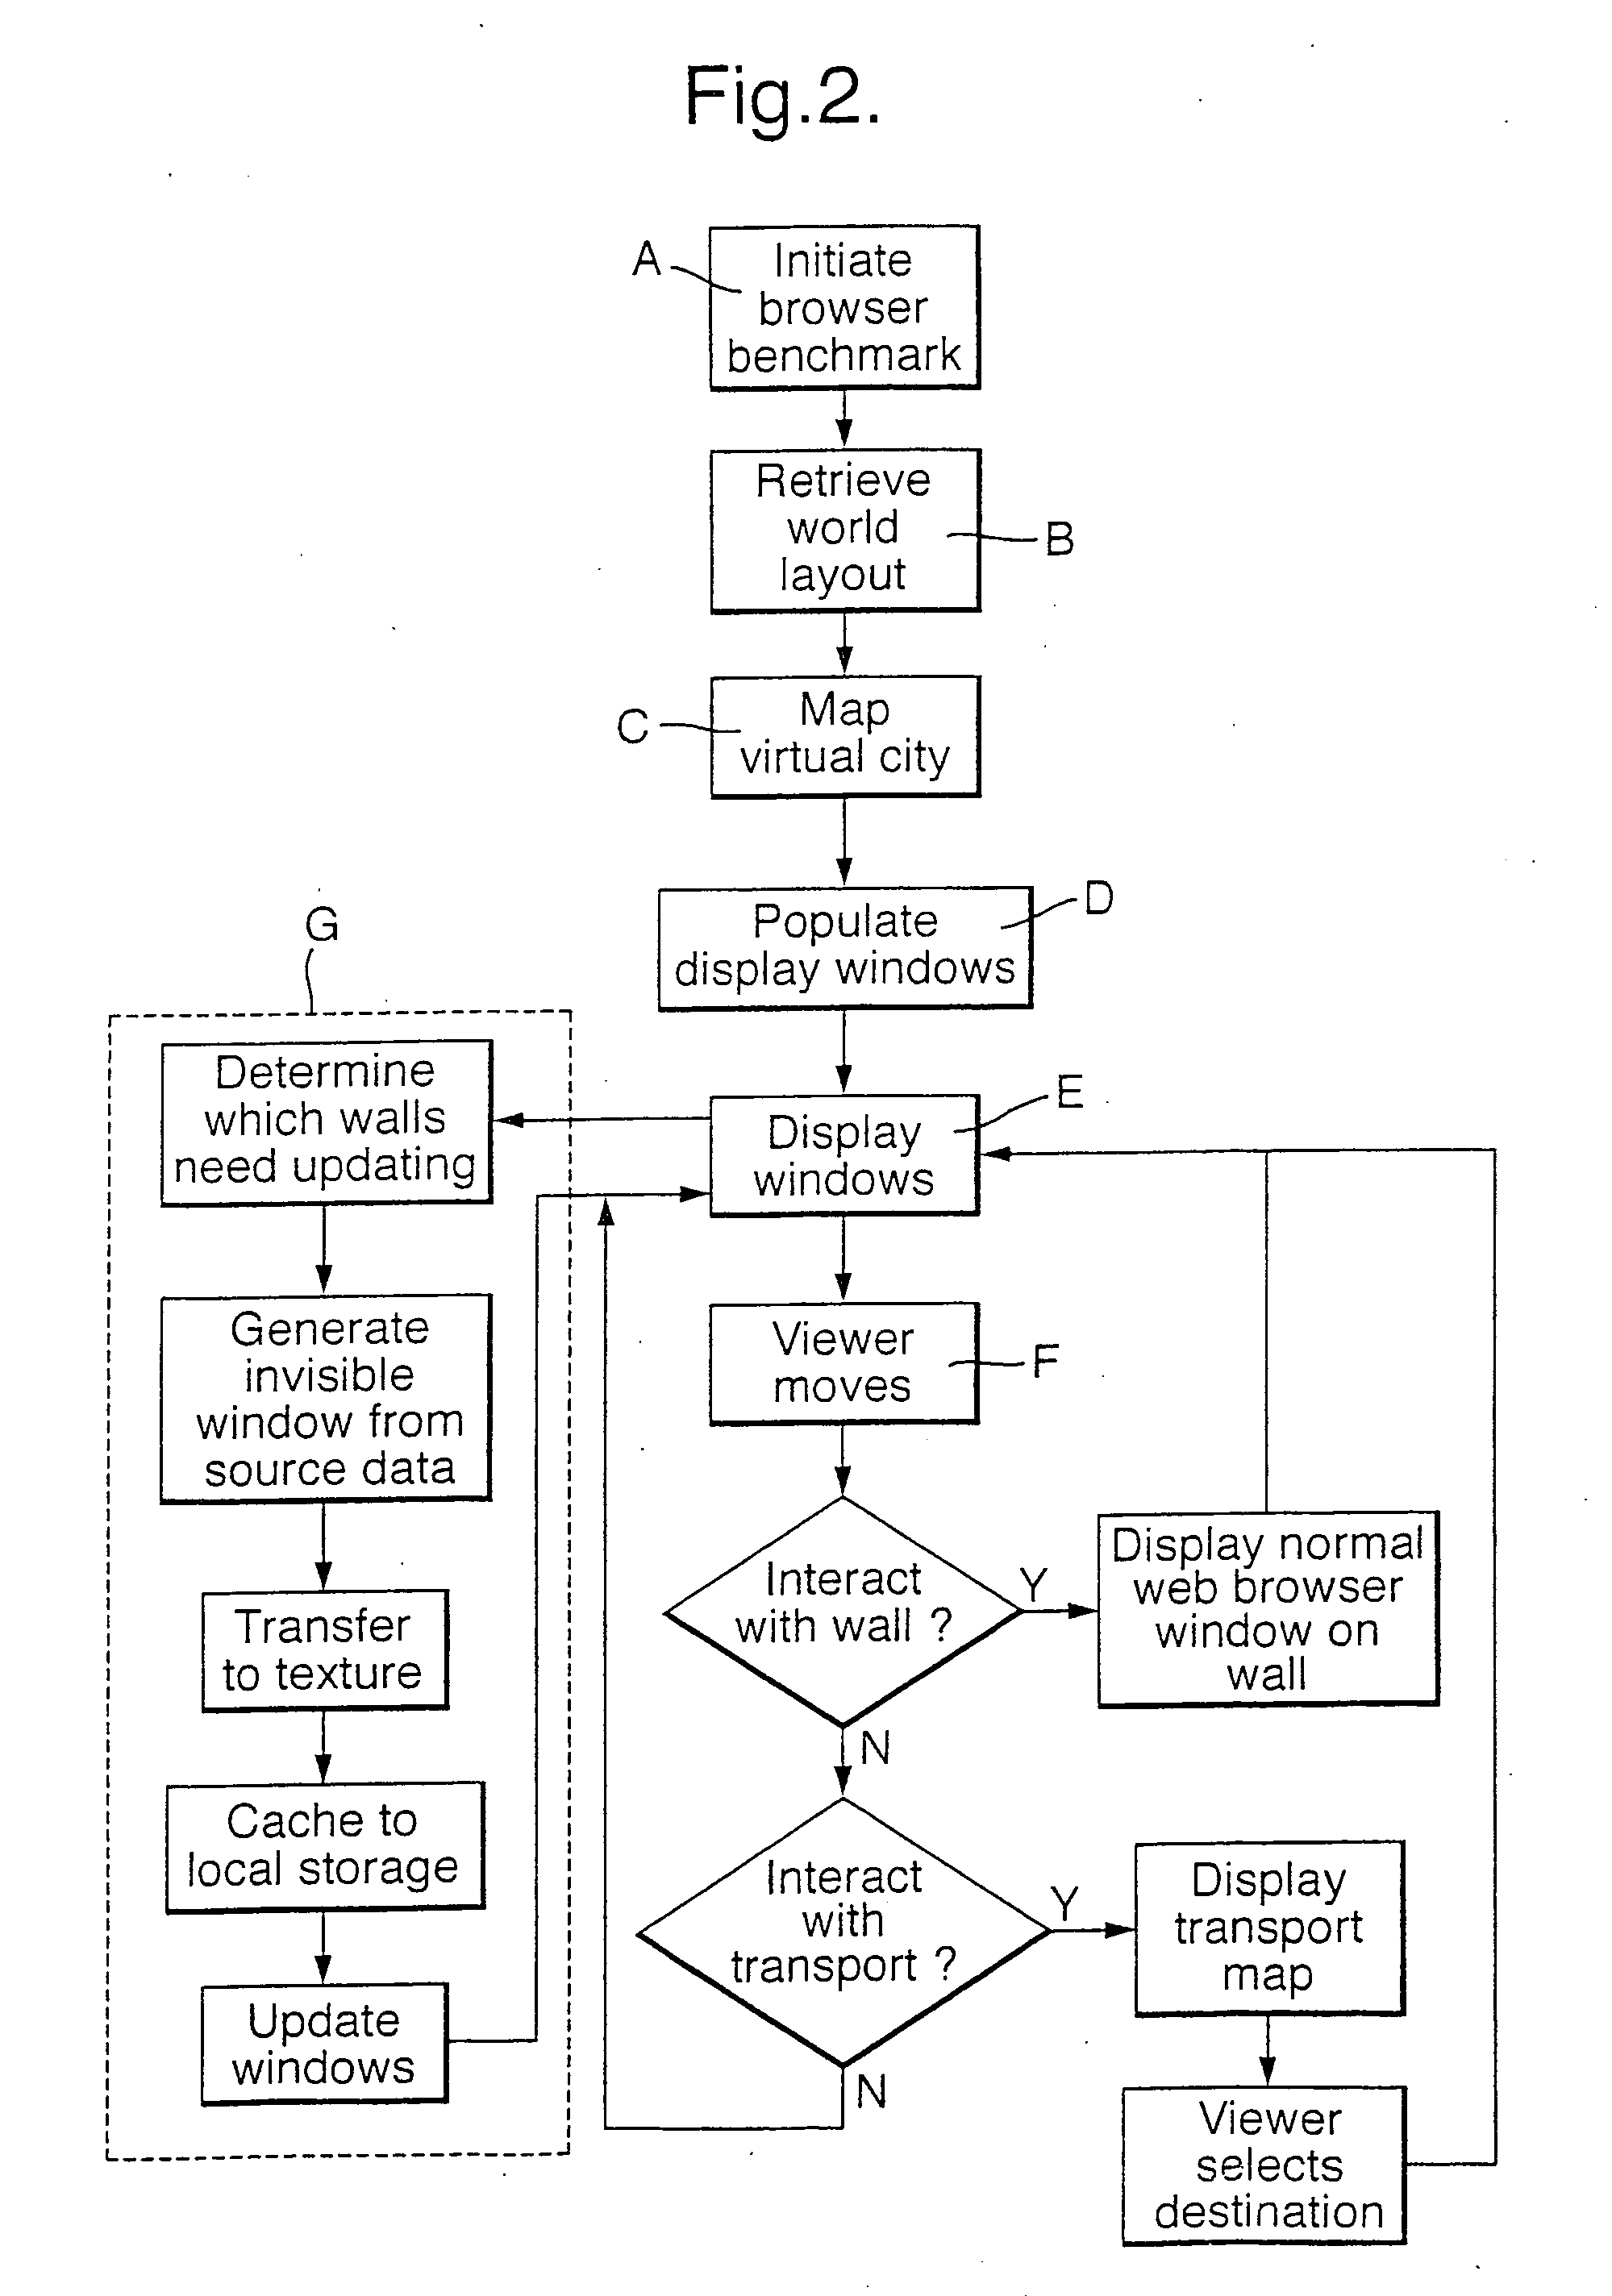 Graphical user interface for an information display system